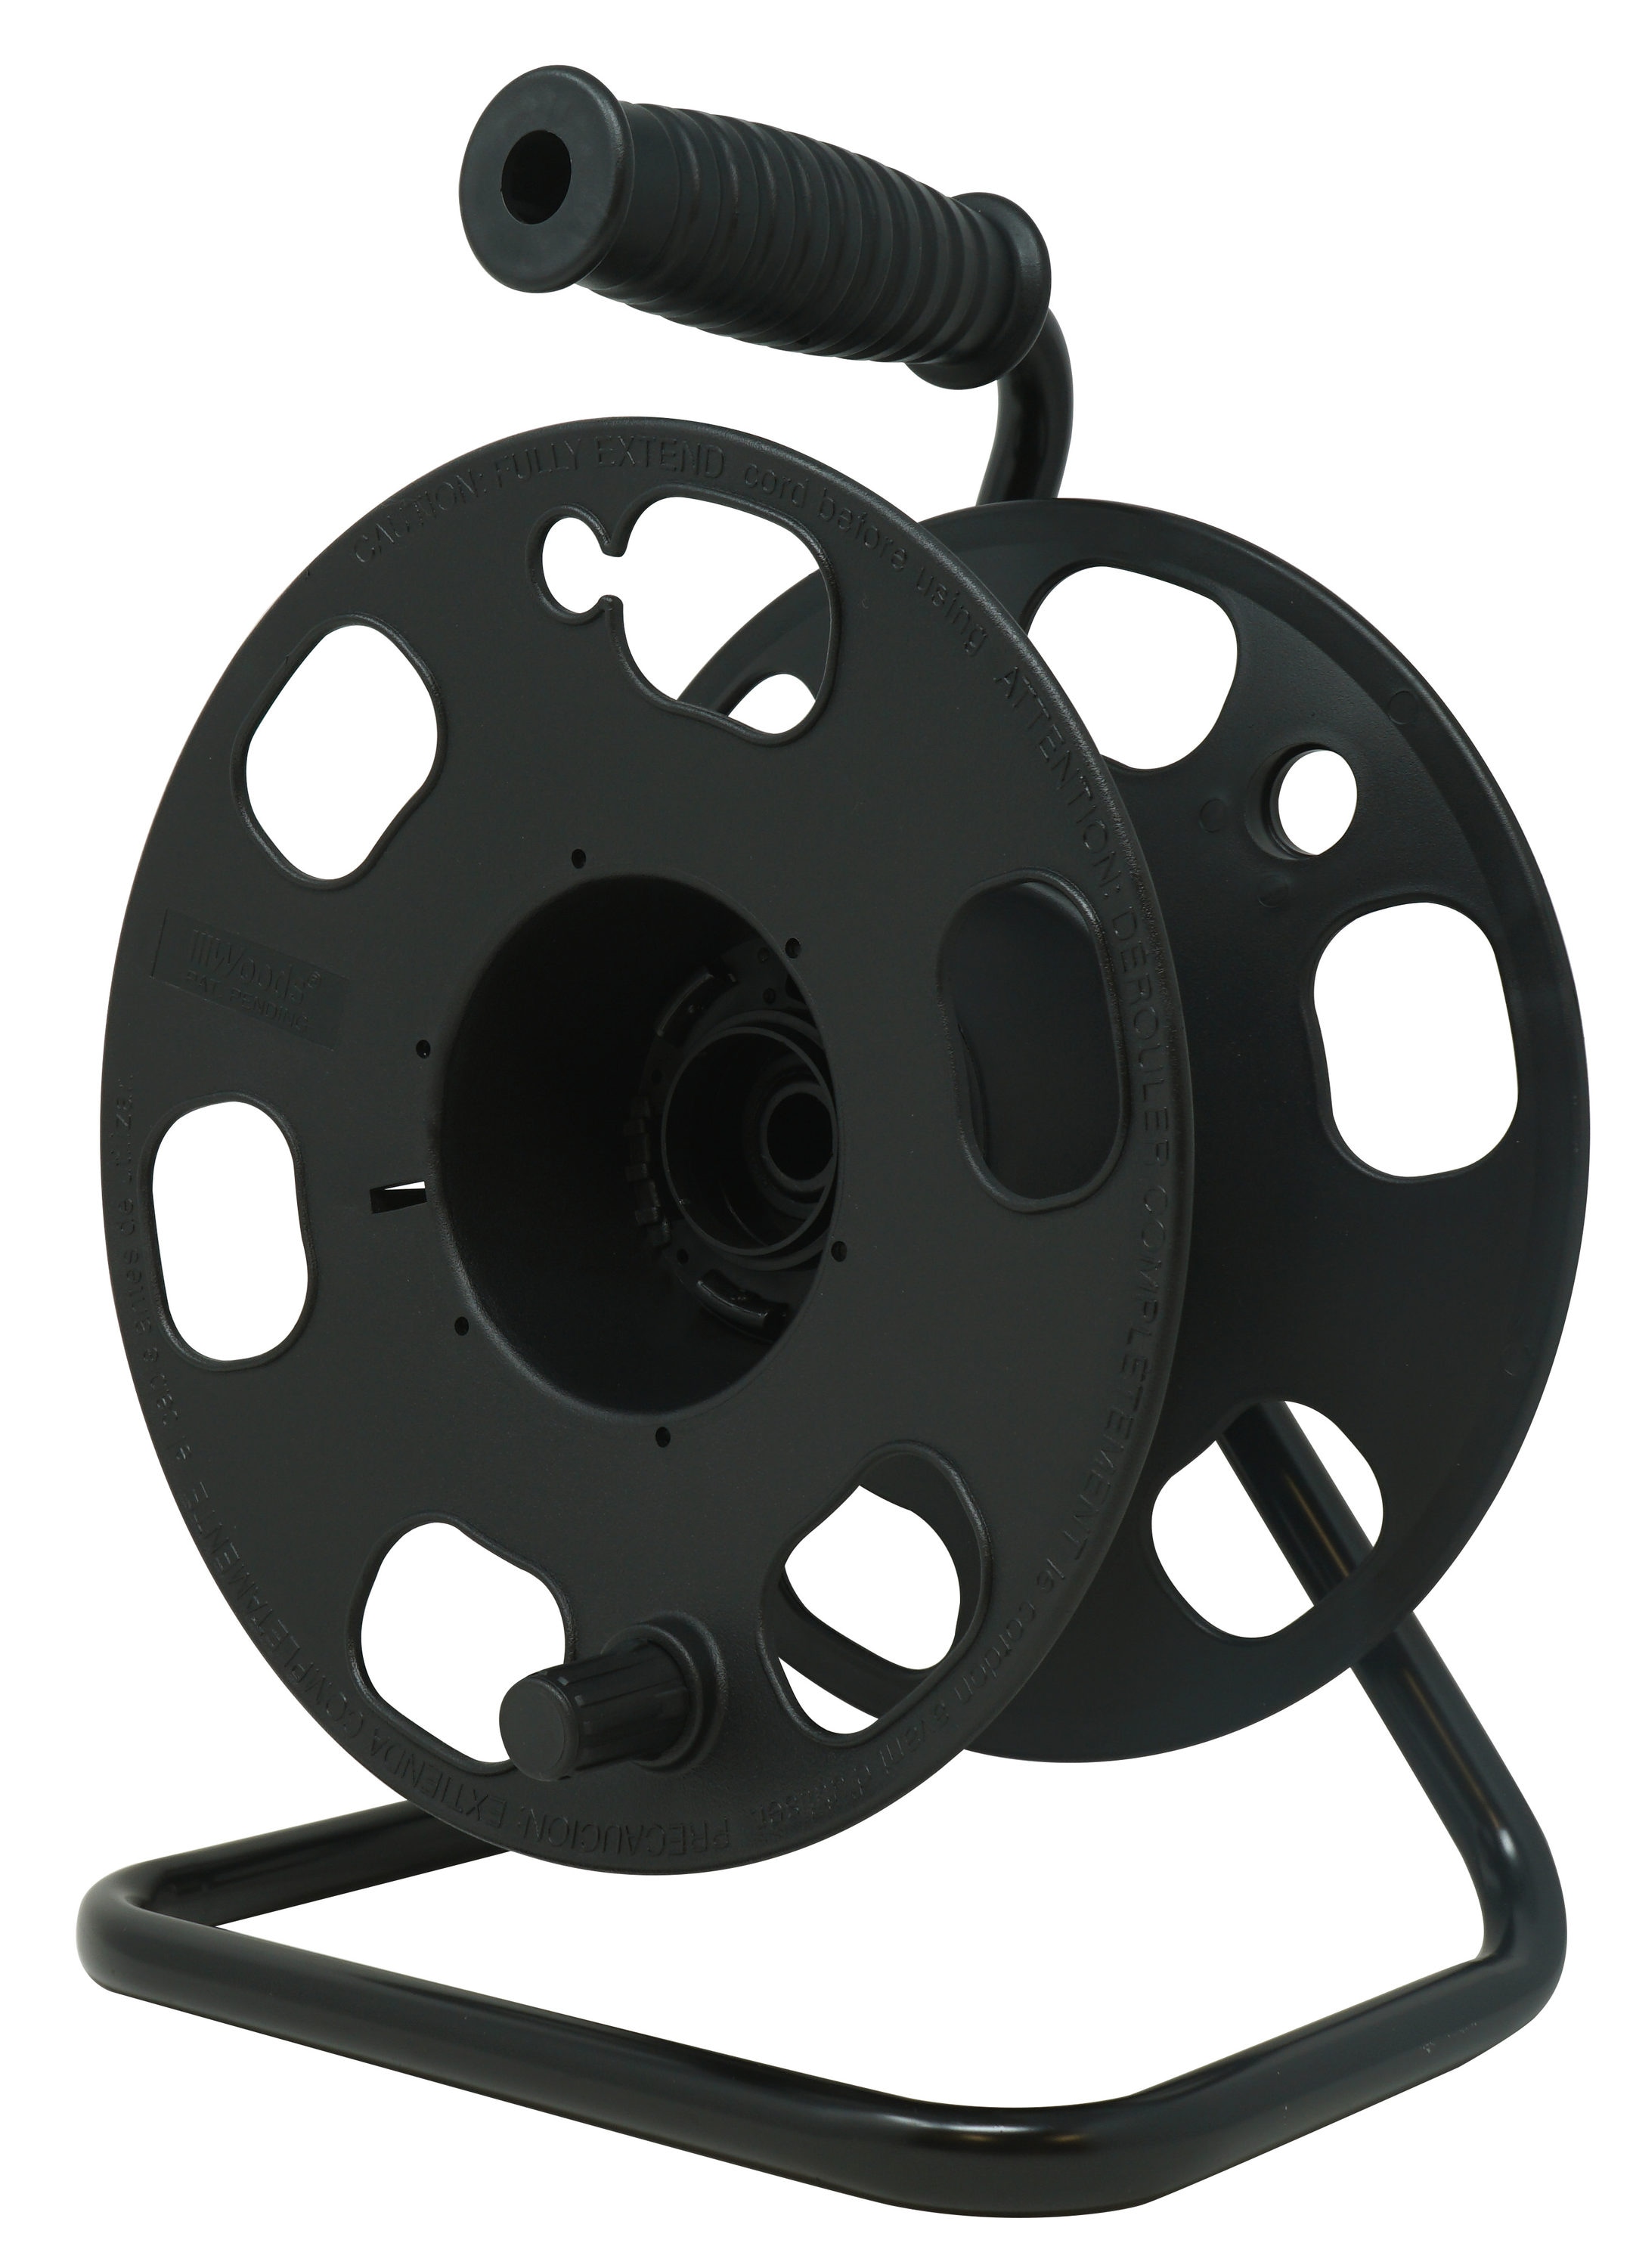 Iron Forge Extension Cord Storage Reel-Metal Stand, Black - Portable C -  iron forge tools